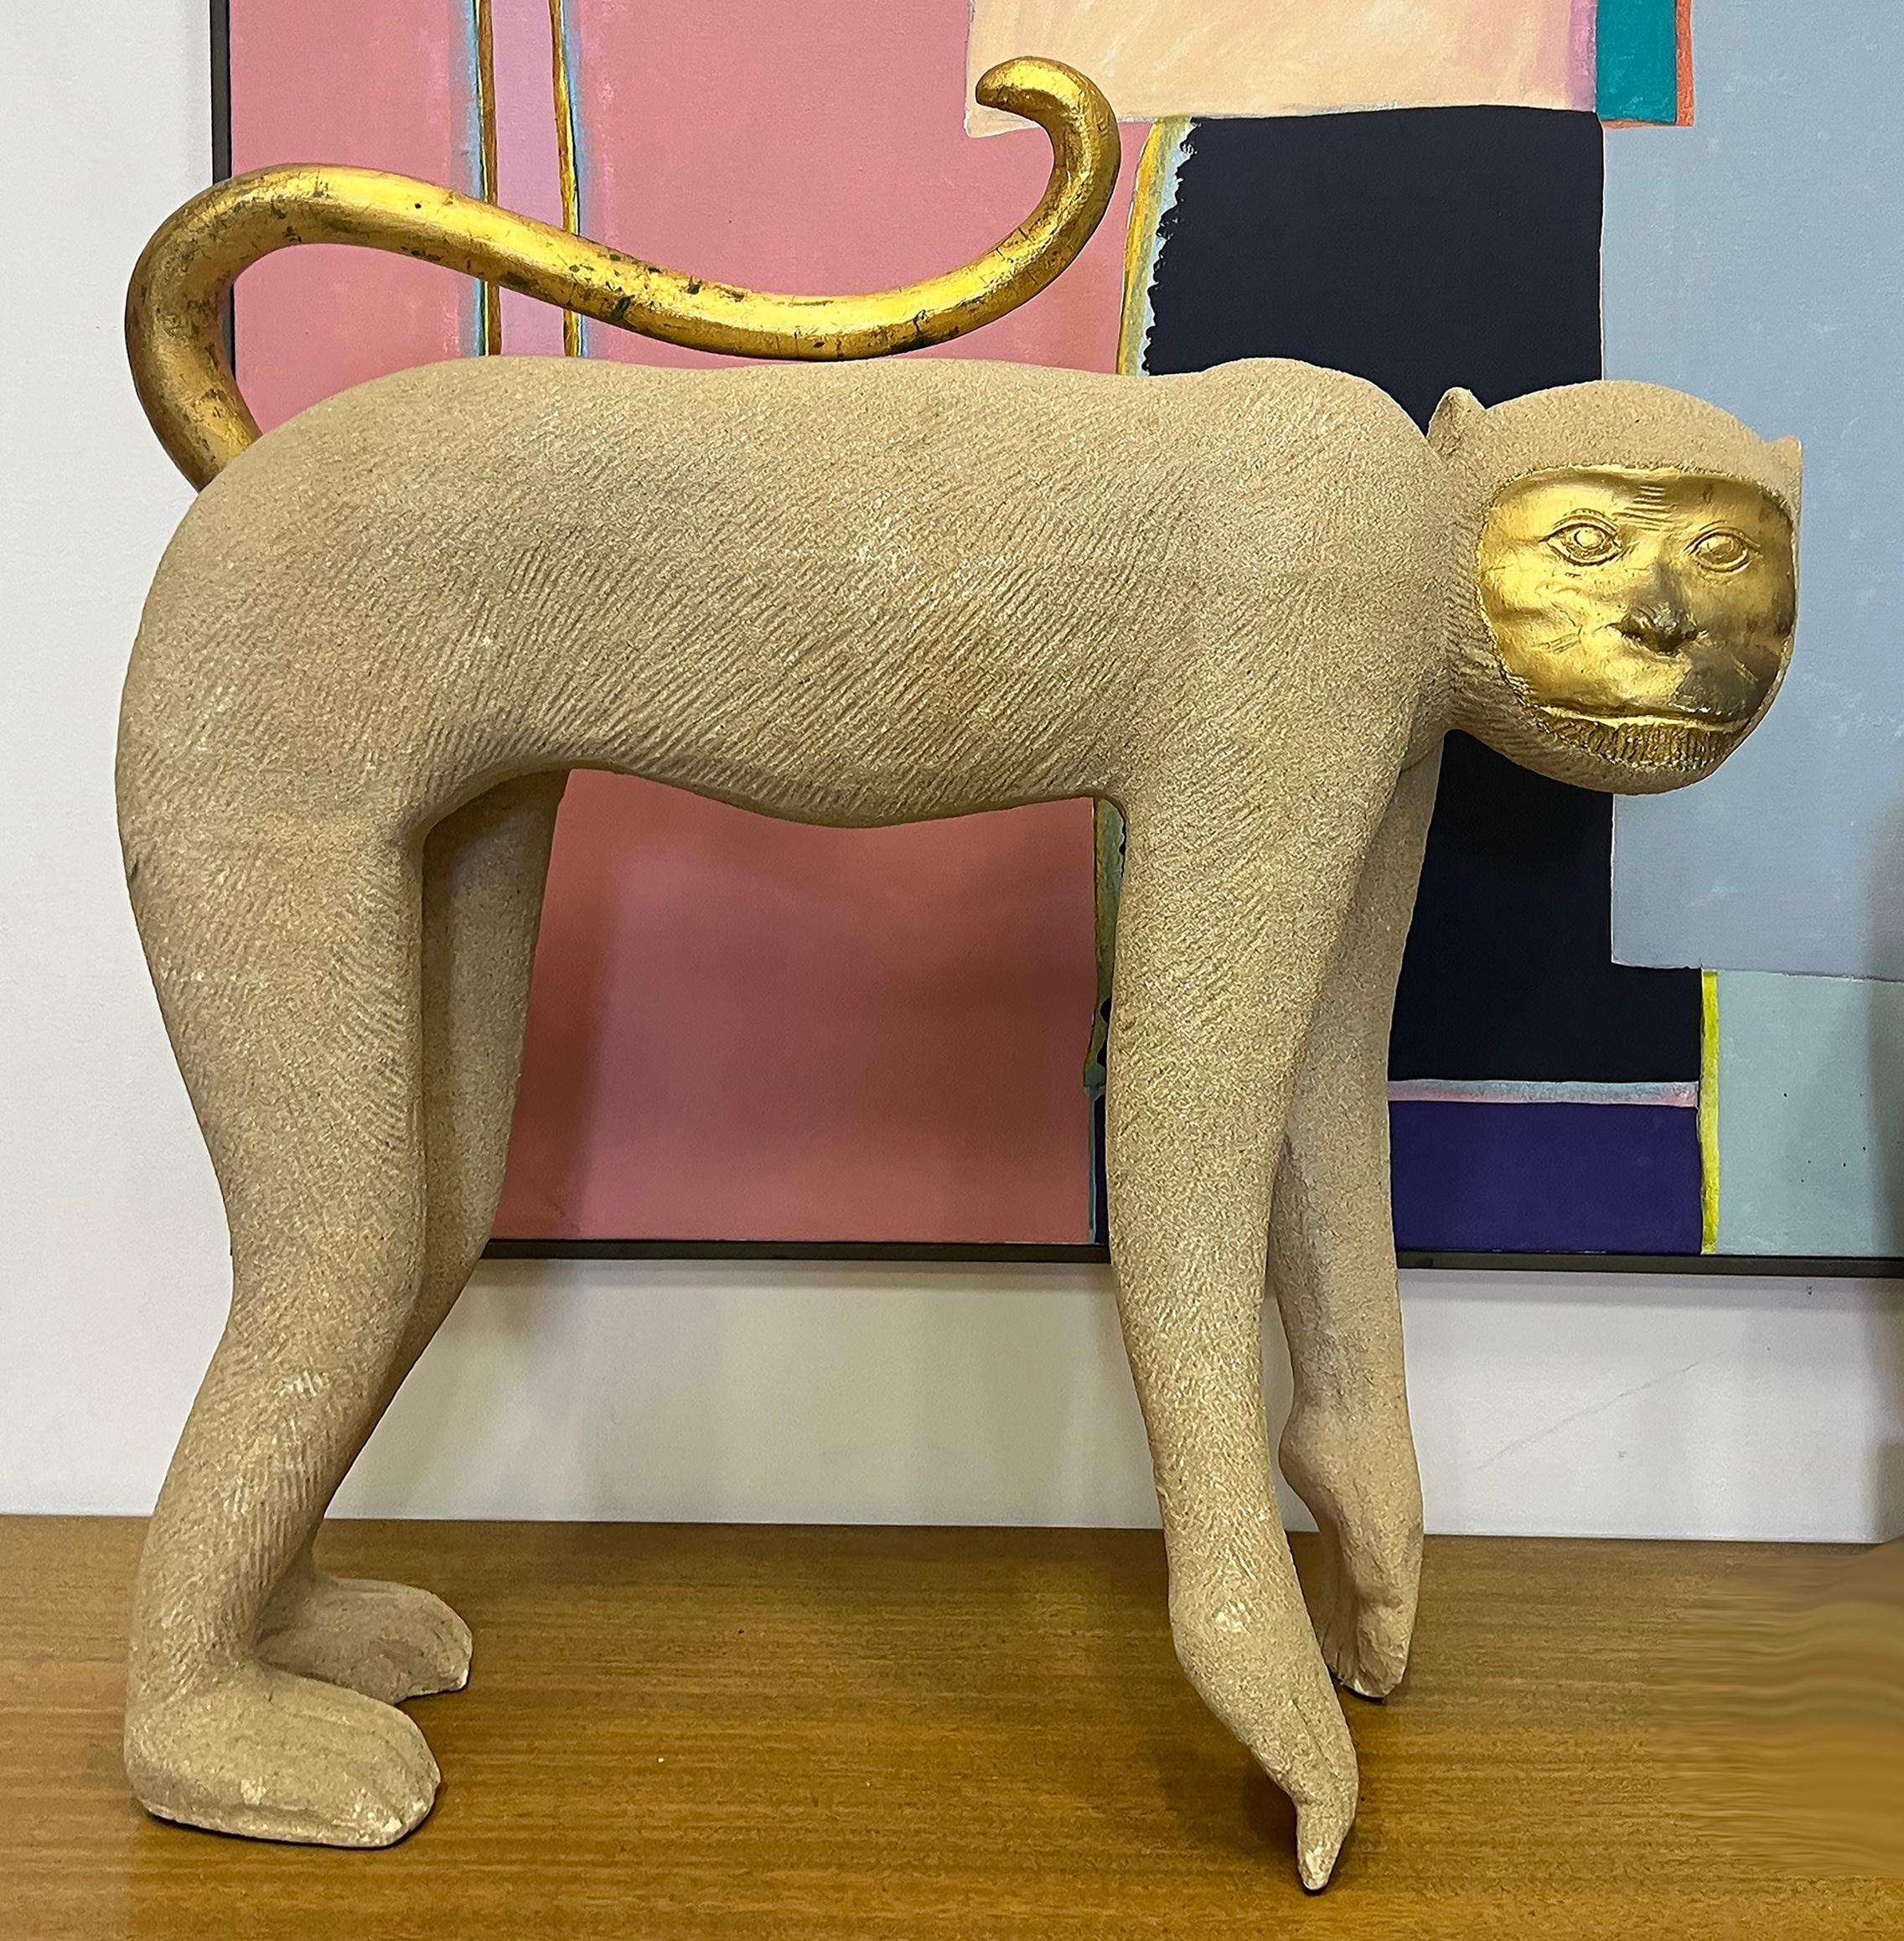 Wood Life Size 1980s Pop-Art Monkey Sculpture With Gilt Accents For Sale